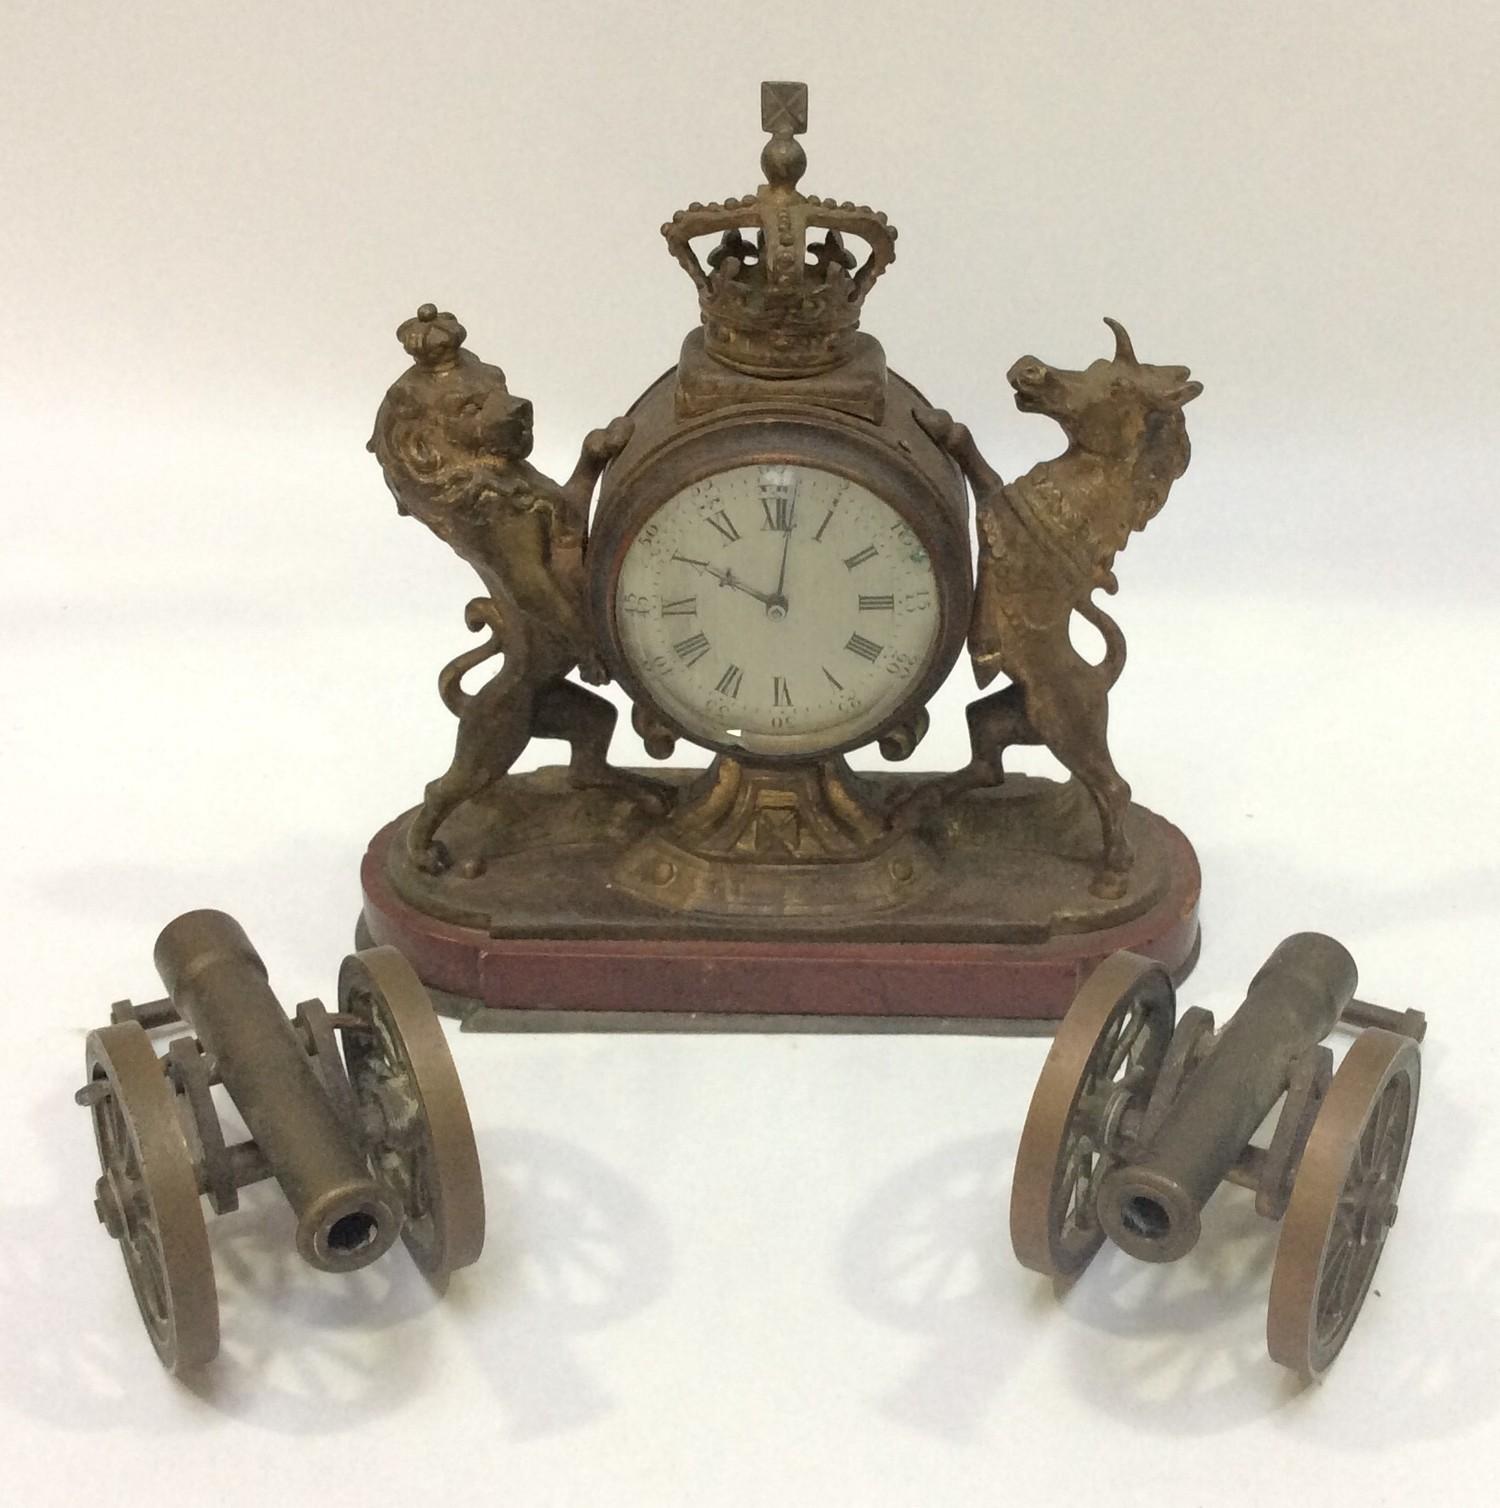 A small gilt brass mantel clock modelled as the Lion and Unicorn from the Royal Coat of Arms,